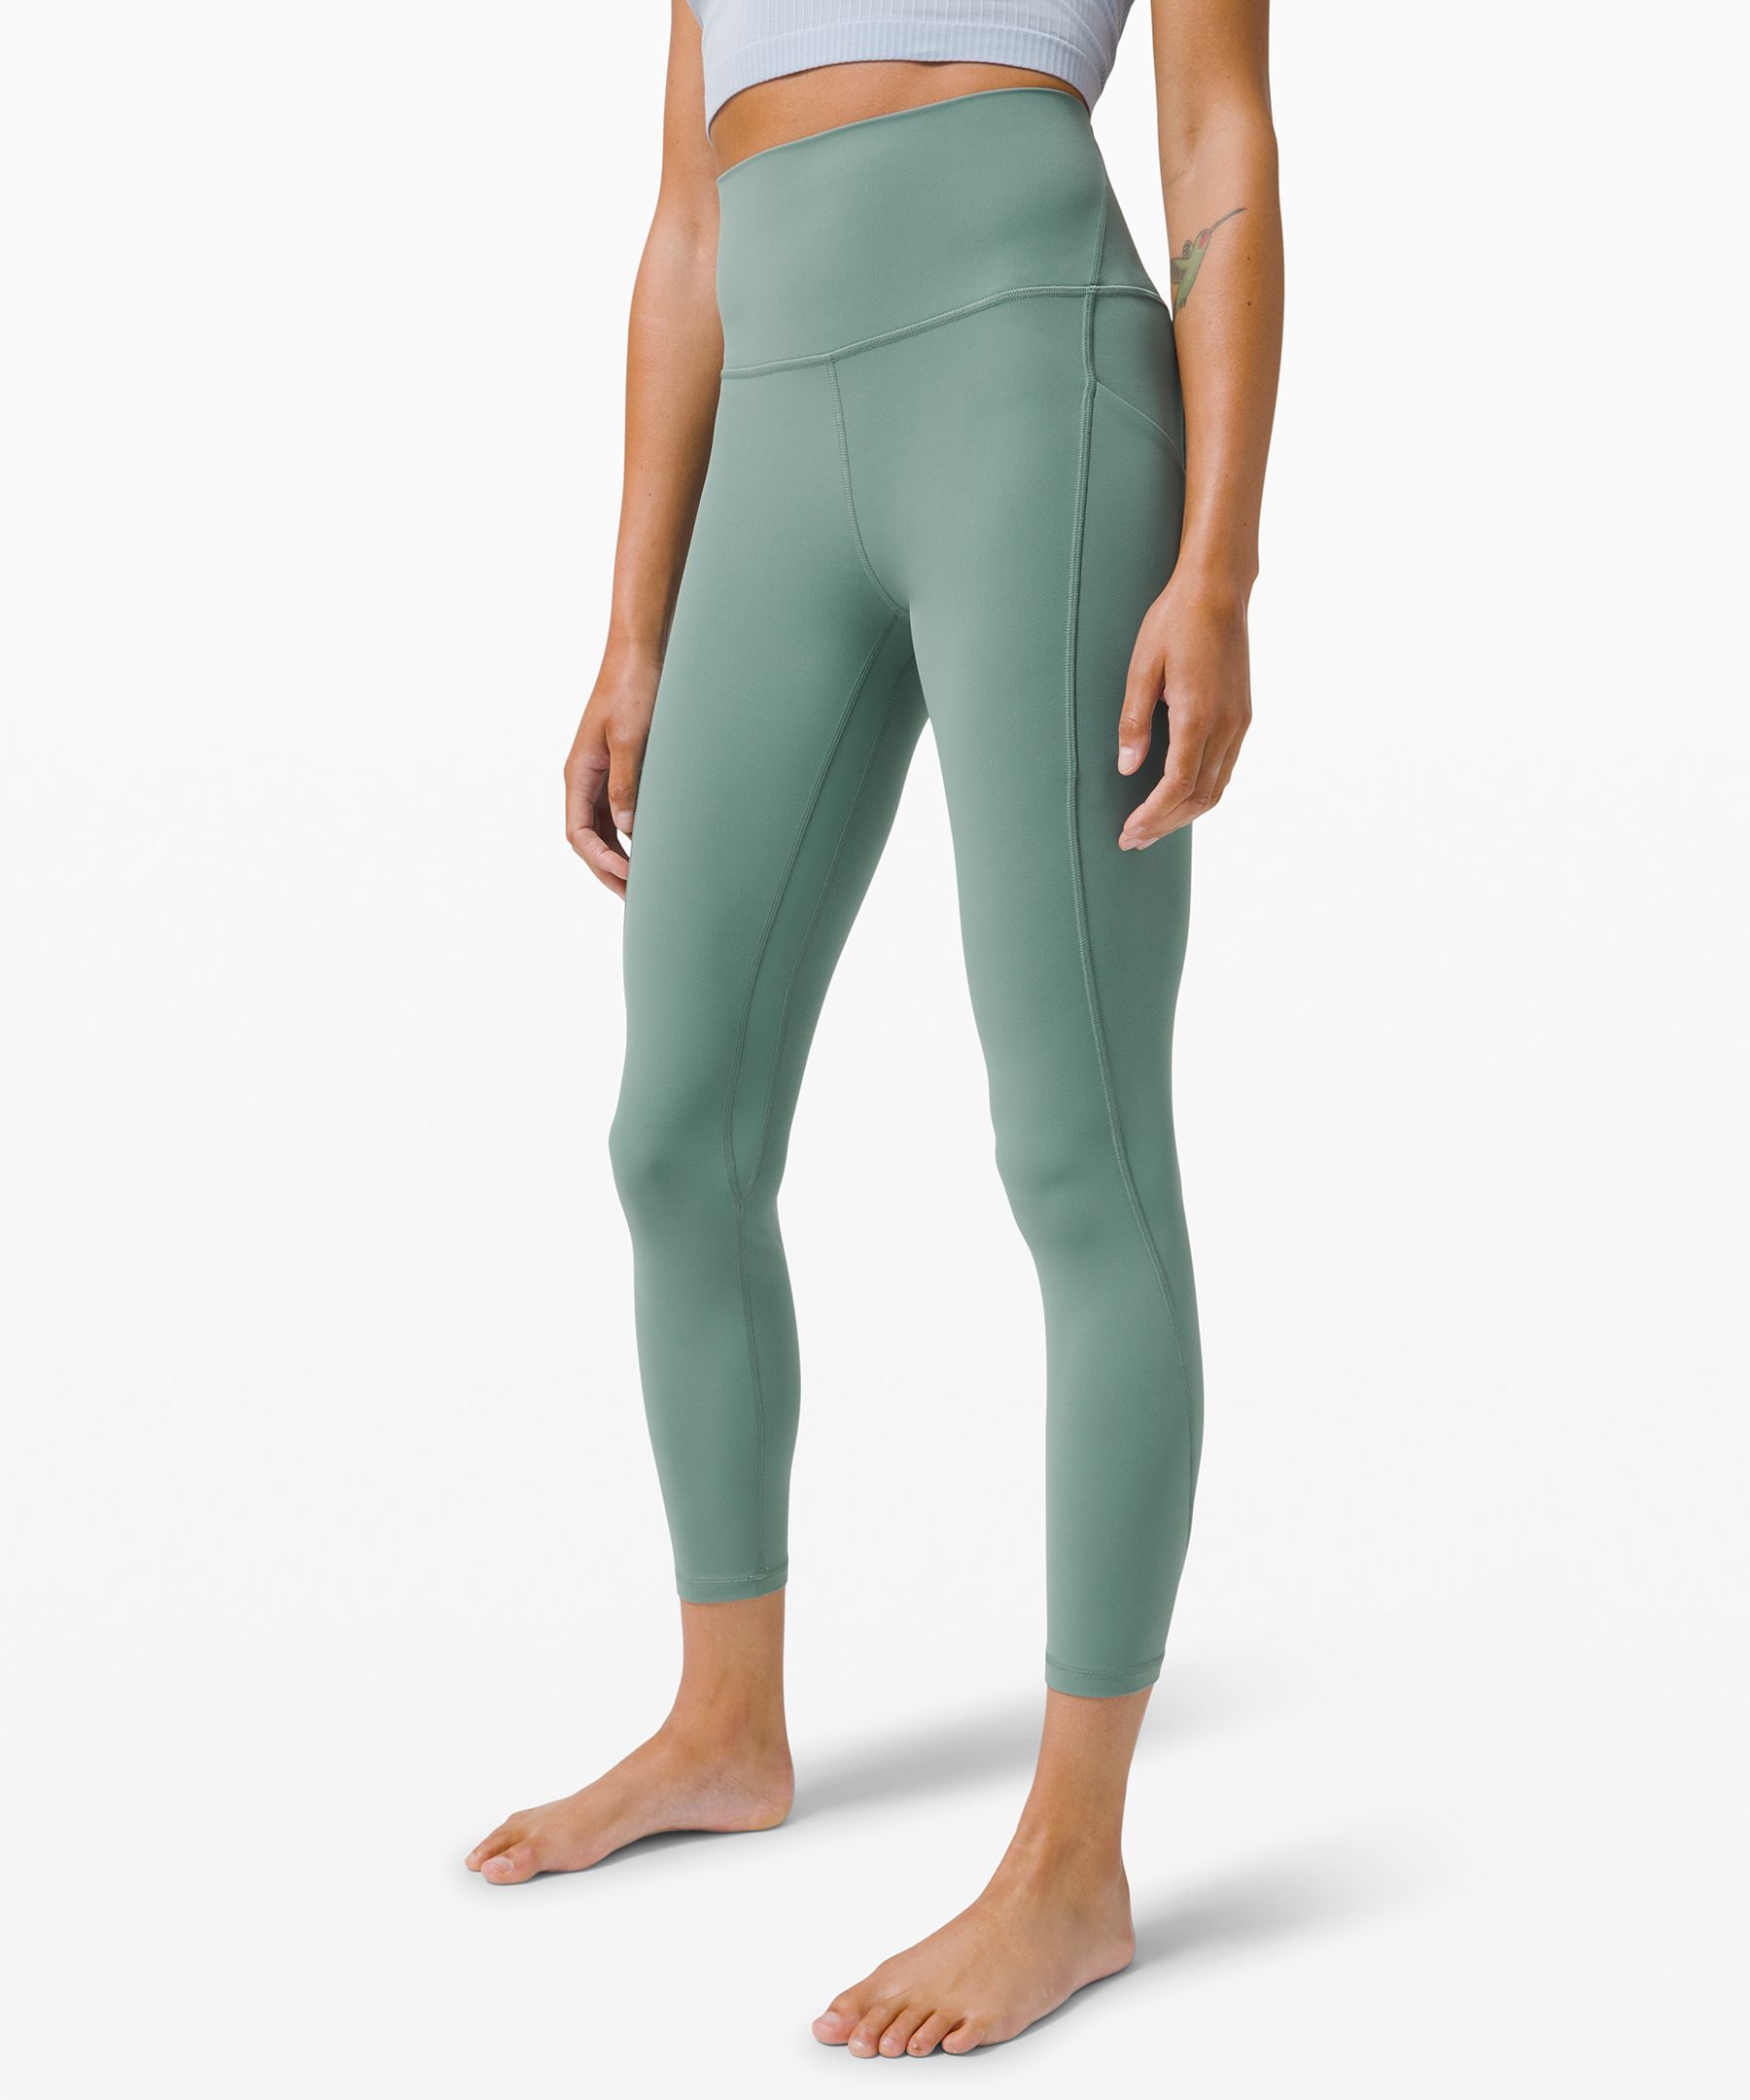 Lululemon Align High-Rise Pant with Pockets 25 - Mulled Wine